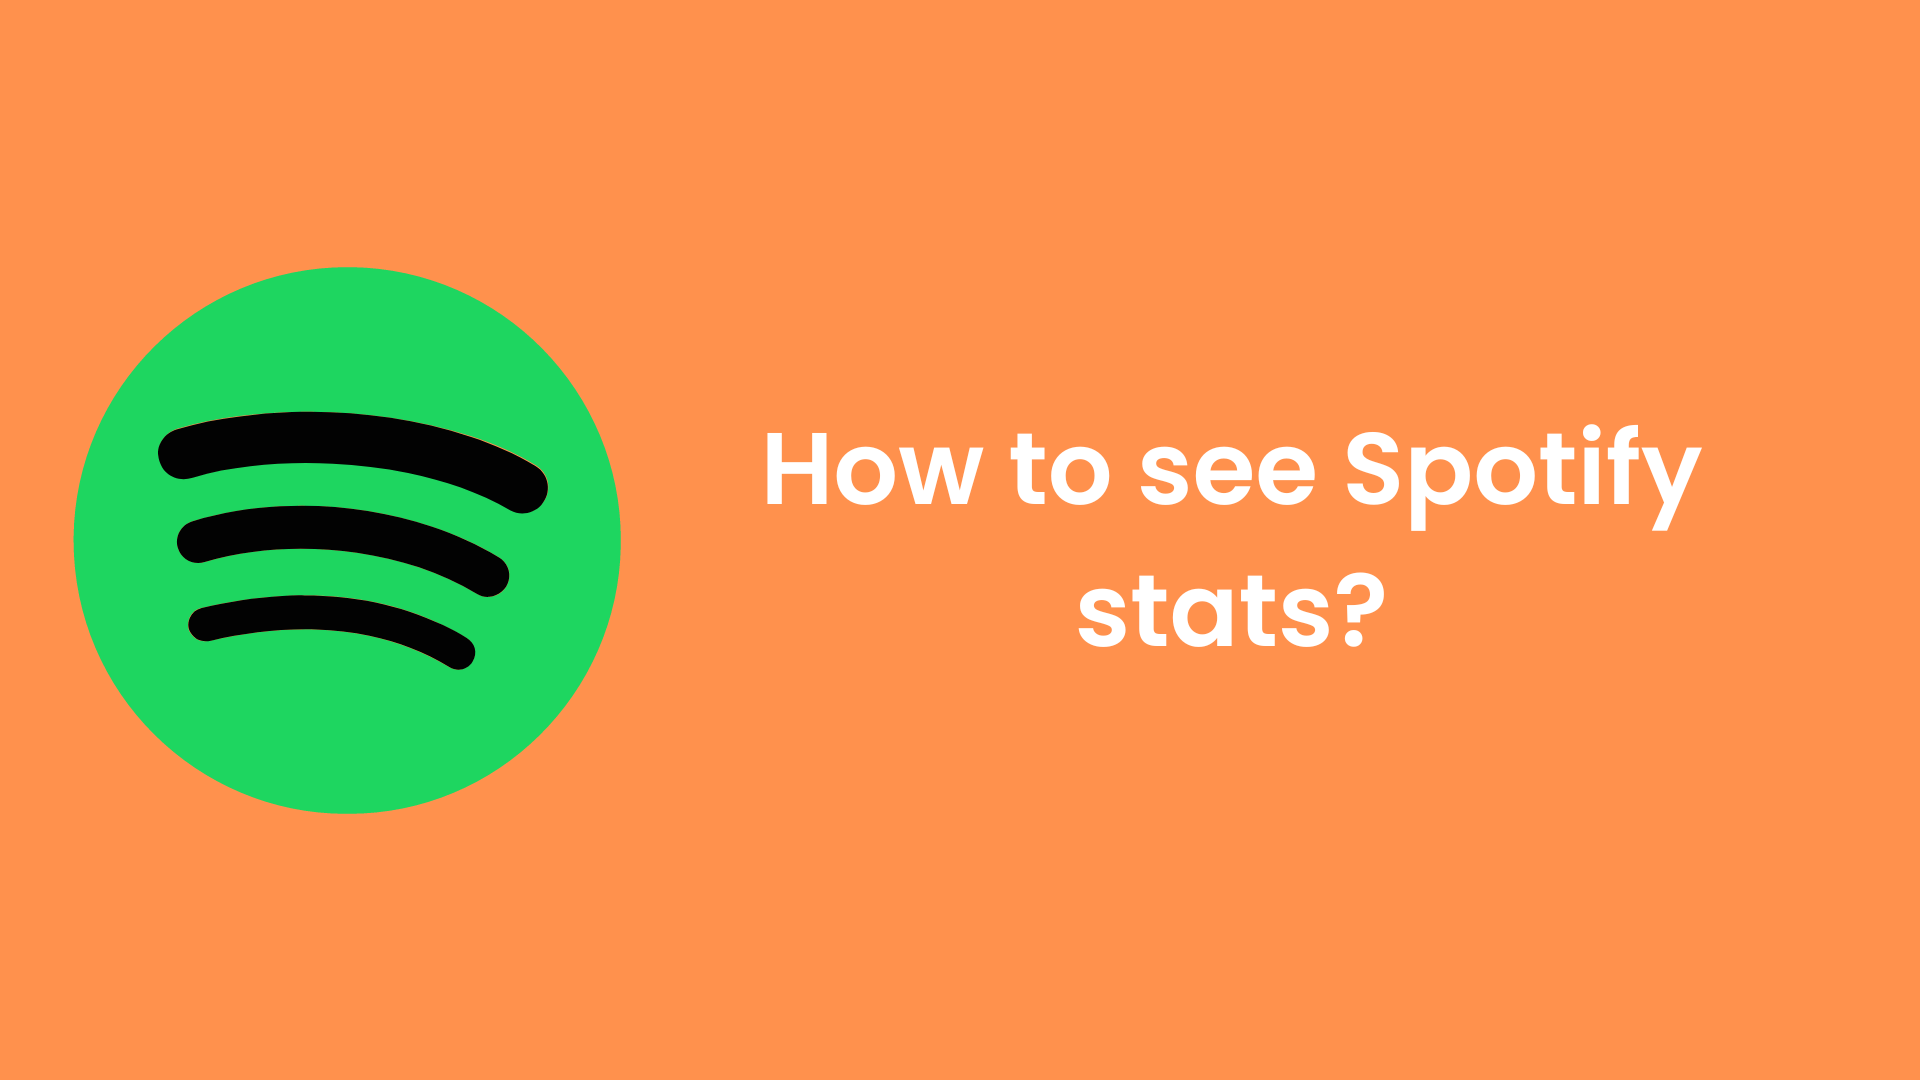 How to see Spotify stats?